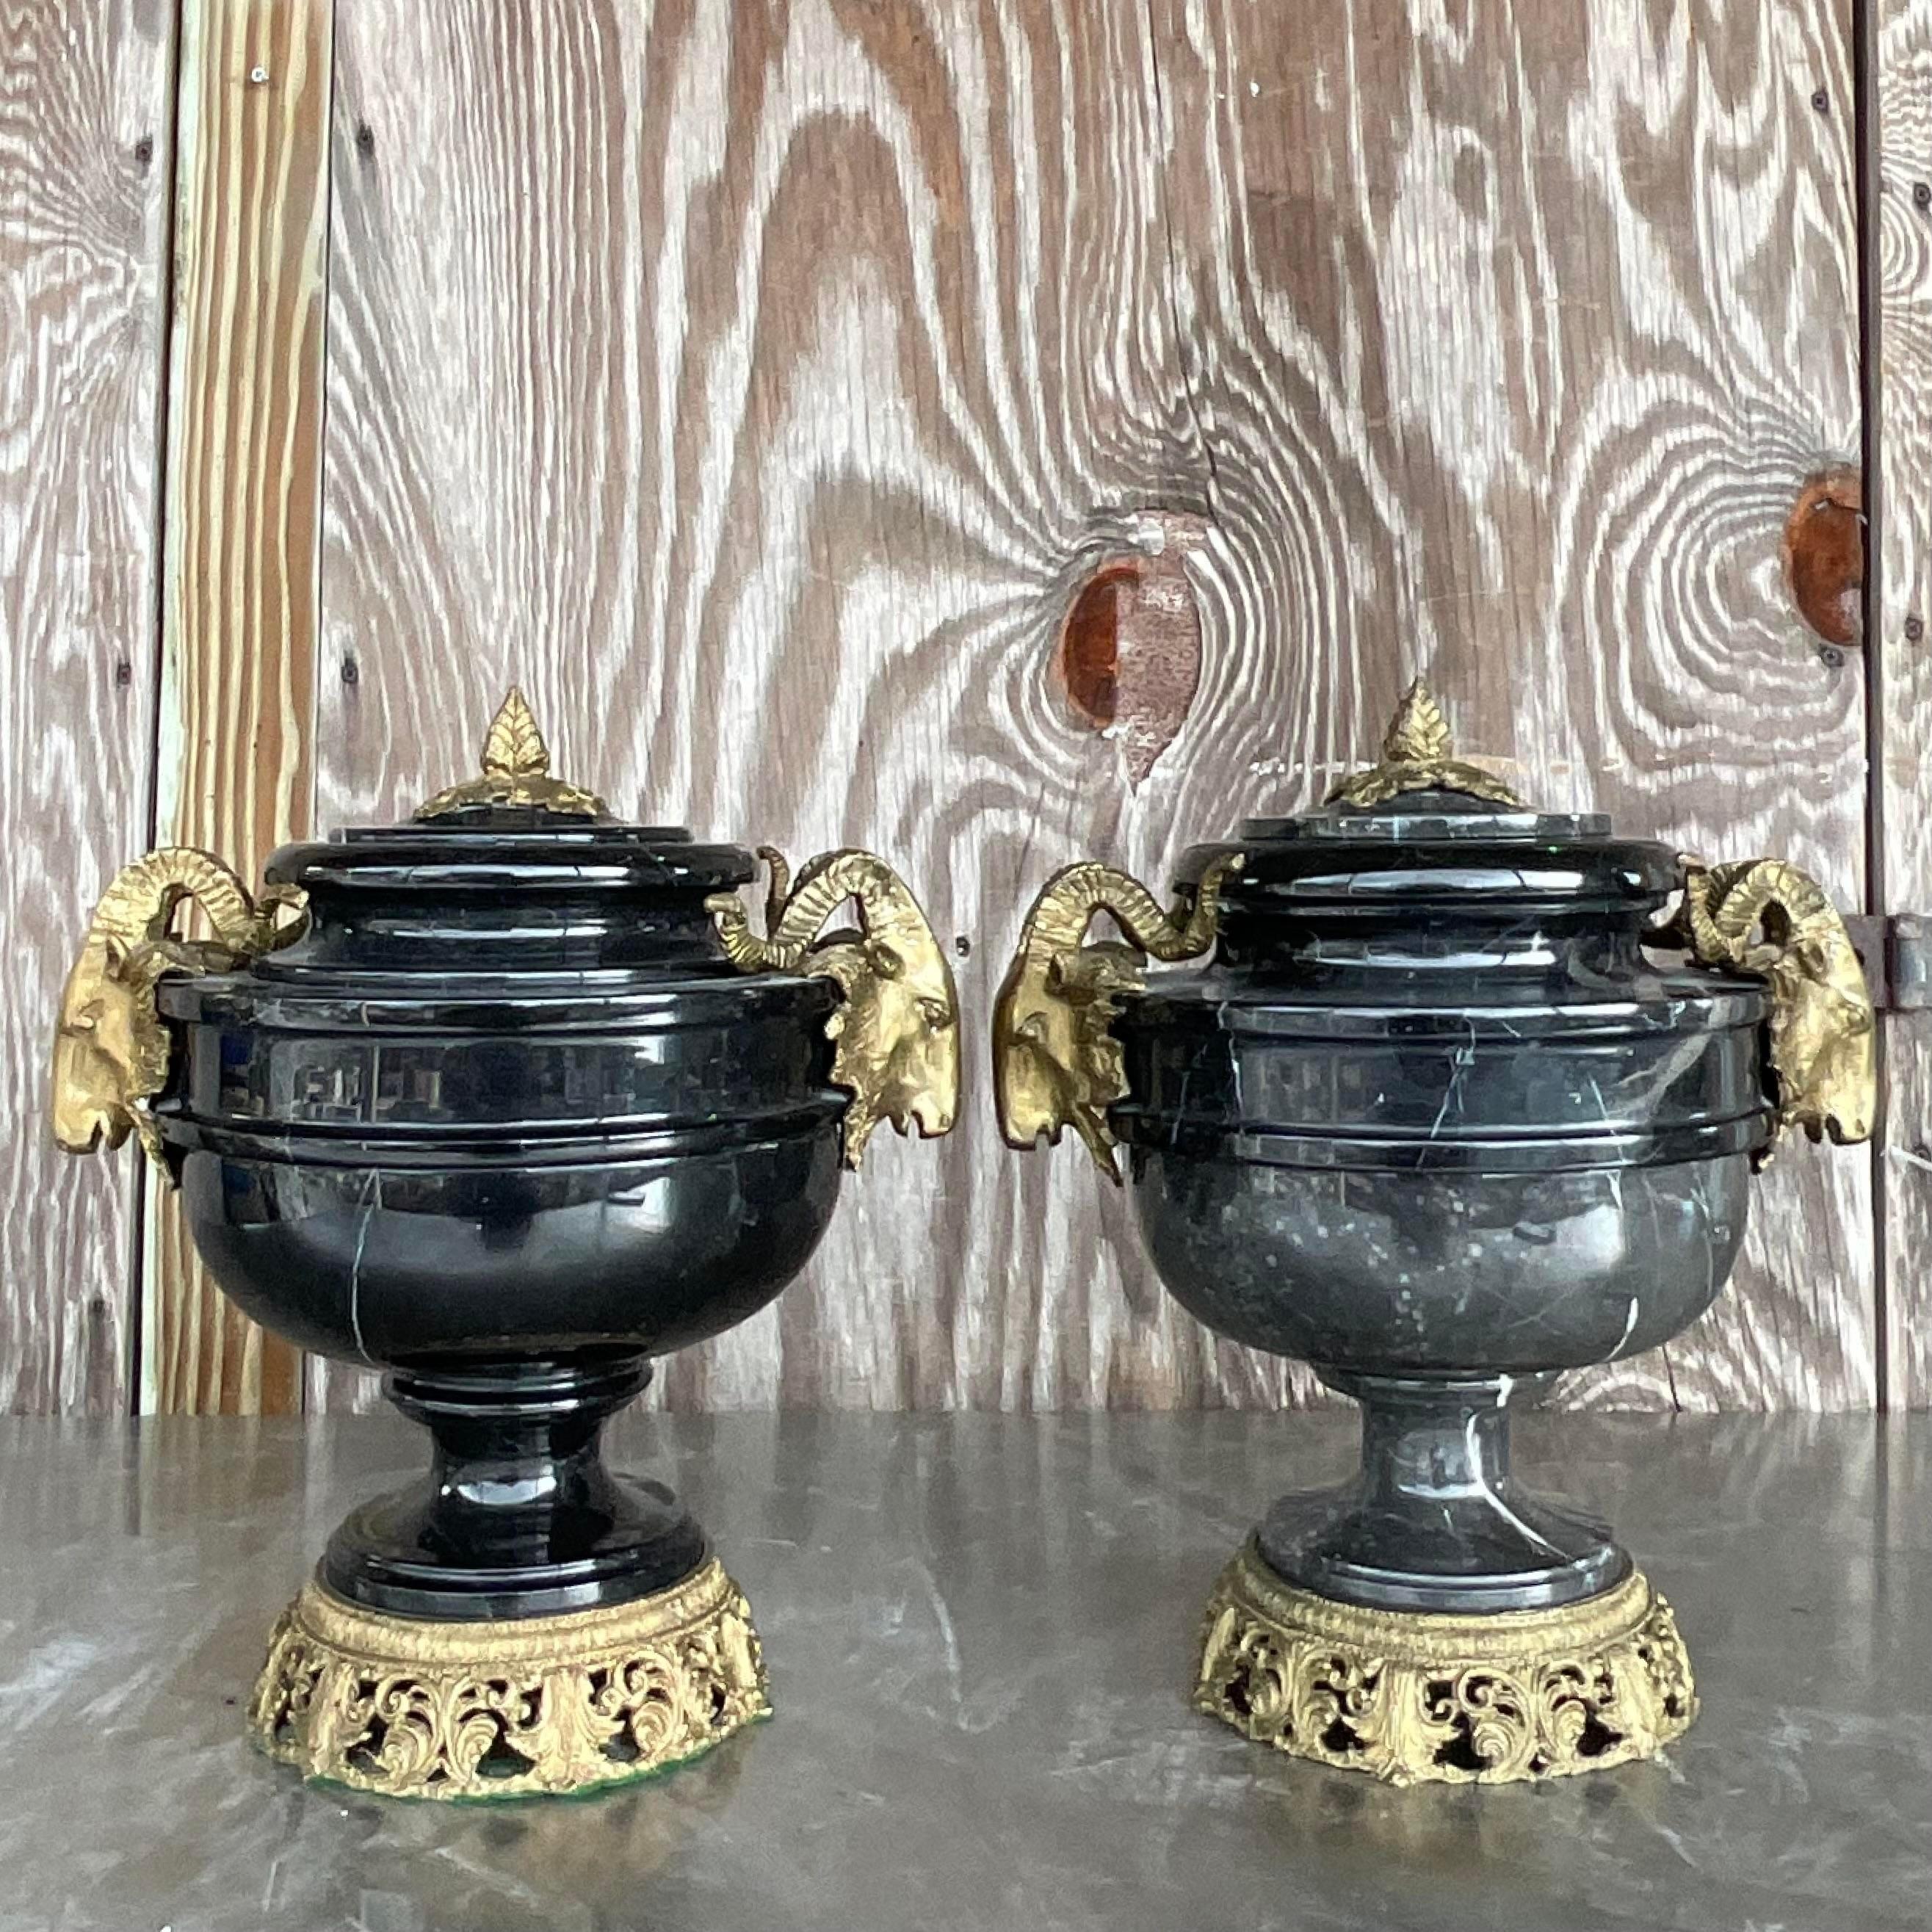 Elevate your decor with this striking pair of vintage urns featuring black marble and brass ram's head motifs. Combining bohemian flair with timeless elegance, these pieces add a touch of sophistication to any American-style interior, exuding a